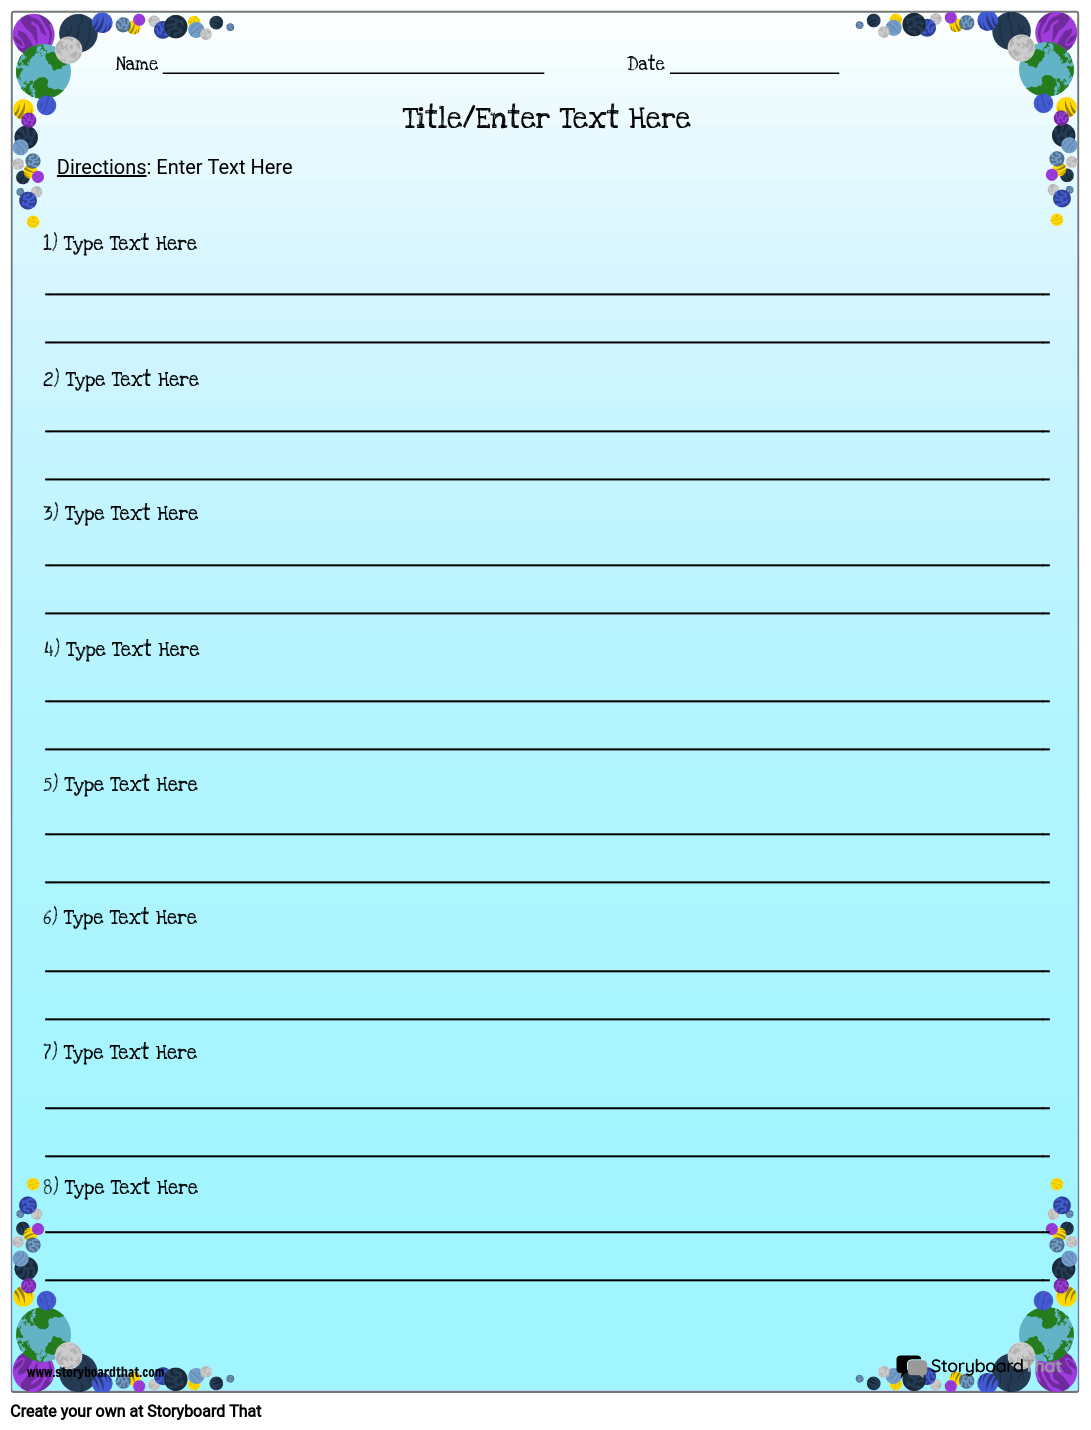 Earth and Planets Custom Definition Worksheet Template